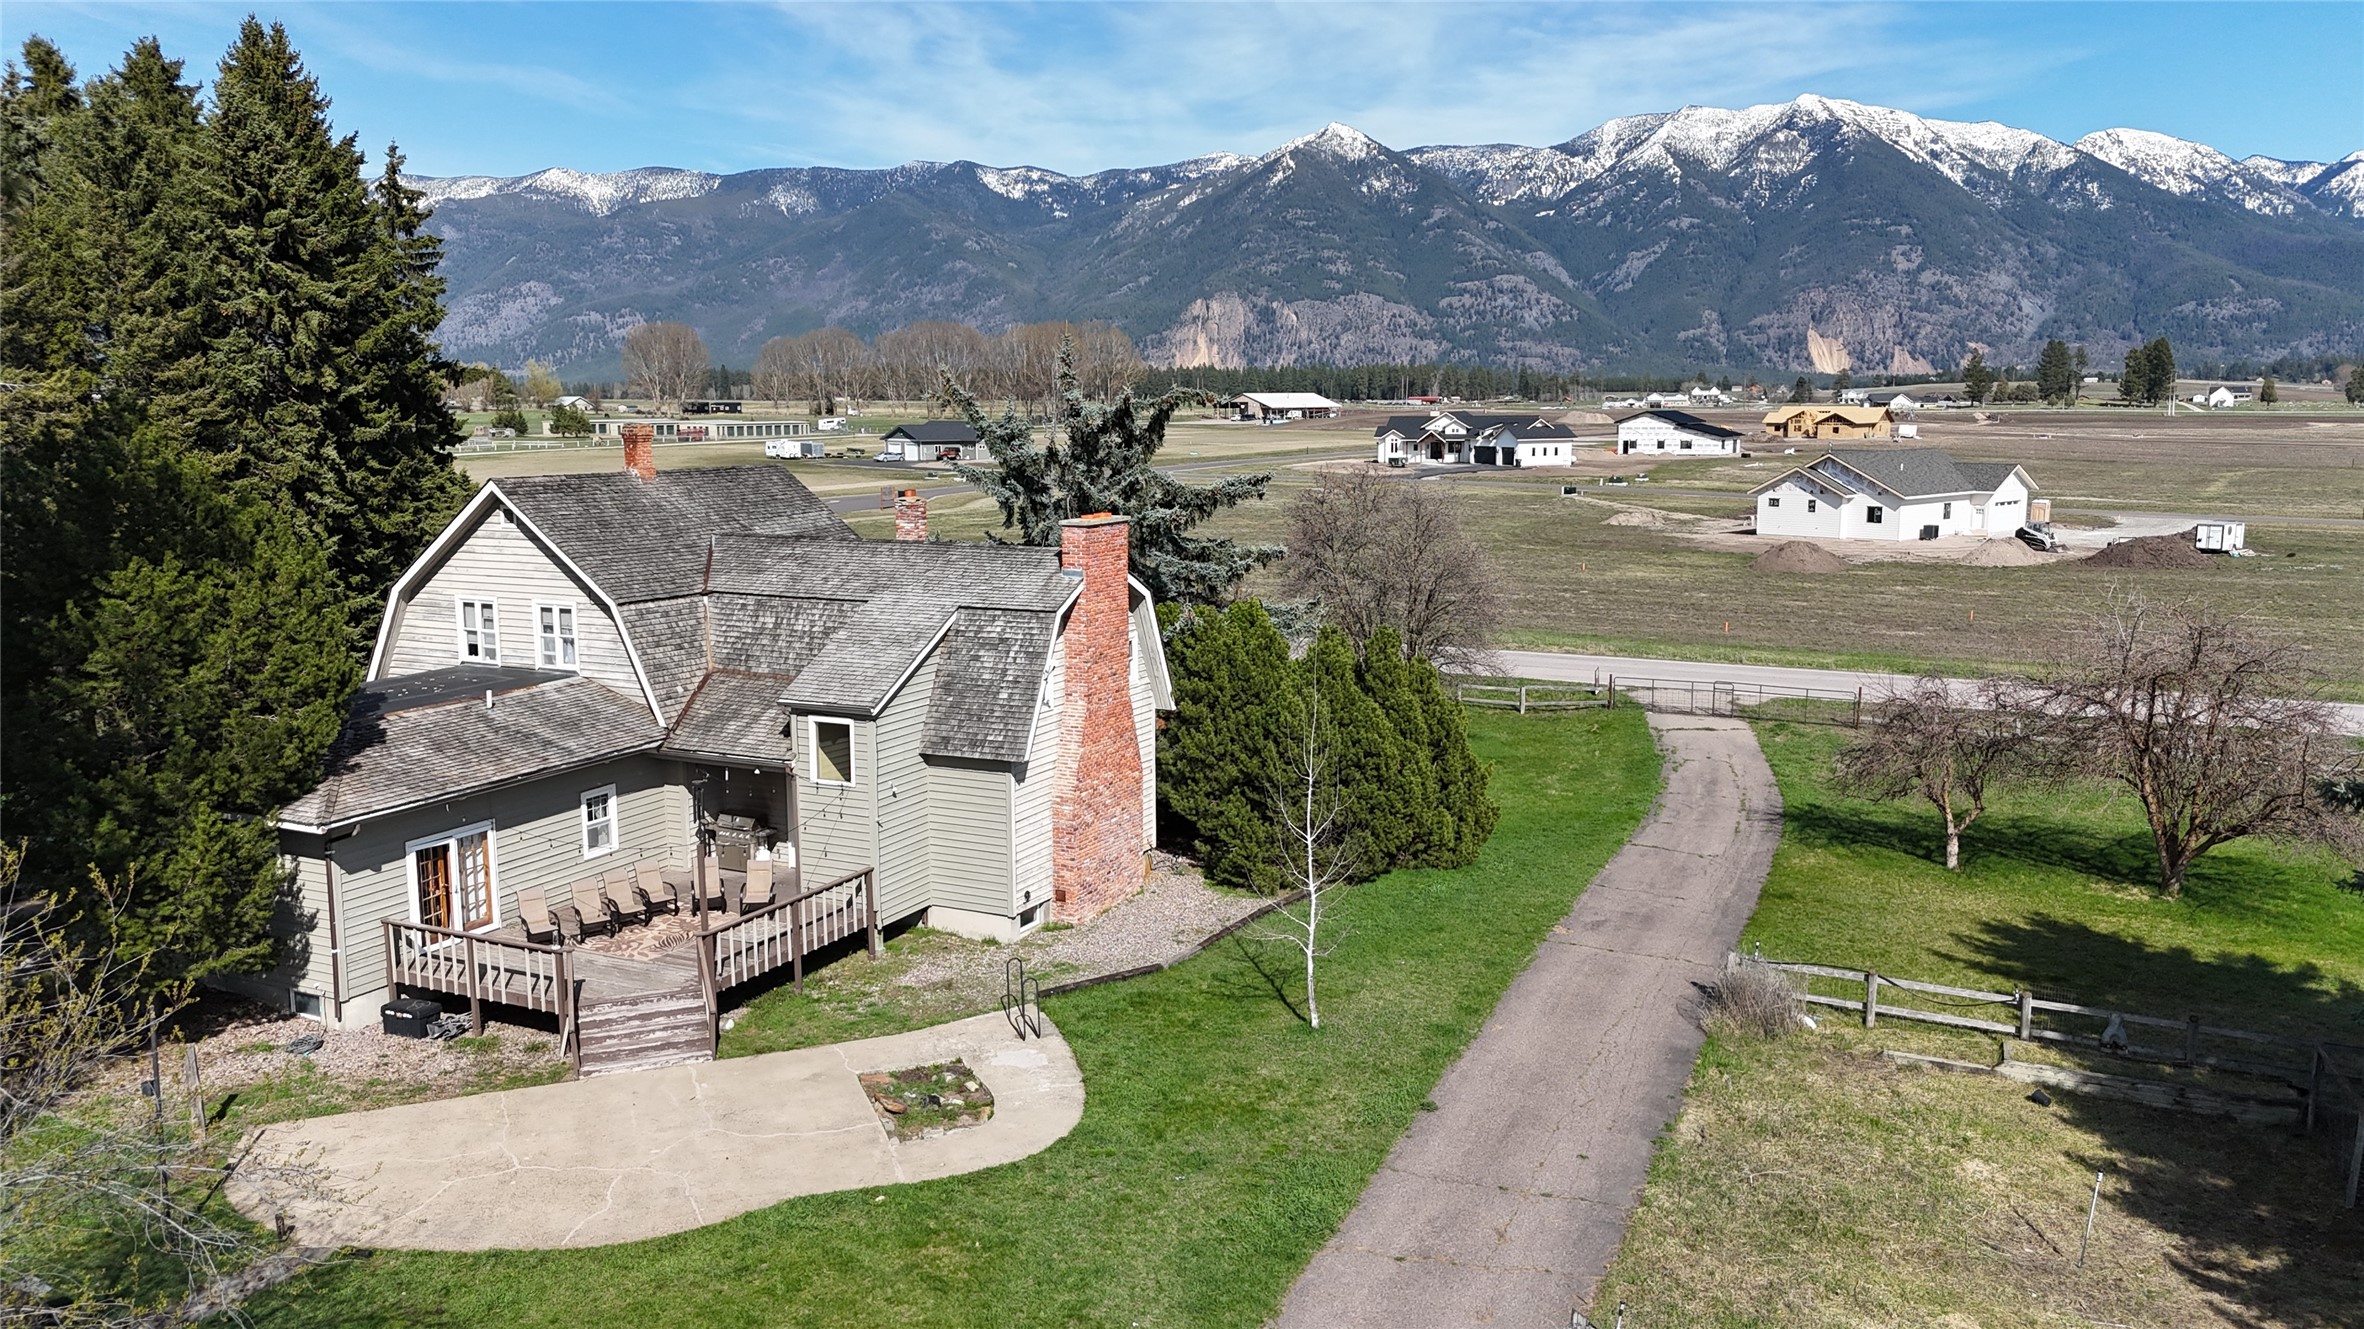 Experience the ultimate equestrian lifestyle in this expansive 22-acre property located in one of the most beautiful locations in the Flathead Valley. This horse lover's paradise features a charming 3-bedroom, 2-bath farmhouse, 5-car garage, guest rental cabin, and additional rental bedrooms within the barn, providing excellent supplemental income.

This versatile property is perfect for horse boarding/training and comes equipped with two indoor arenas, a large outdoor arena, a round pen for training, 18 turnouts for pastures, dry lots, and 5 steel pens for holding horses/livestock.  The additional 80x50ft building can be used for hay, equipment storage, and as an event venue. Over $400,000 in improvements have been made to fencing and property in the past 5 years. Don't miss out on the opportunity to own a rare Montana horse property centrally located in the Flathead Valley.  
Call Michael Johnson at 406-270-4911 or your real estate professional today. Appointment Only.